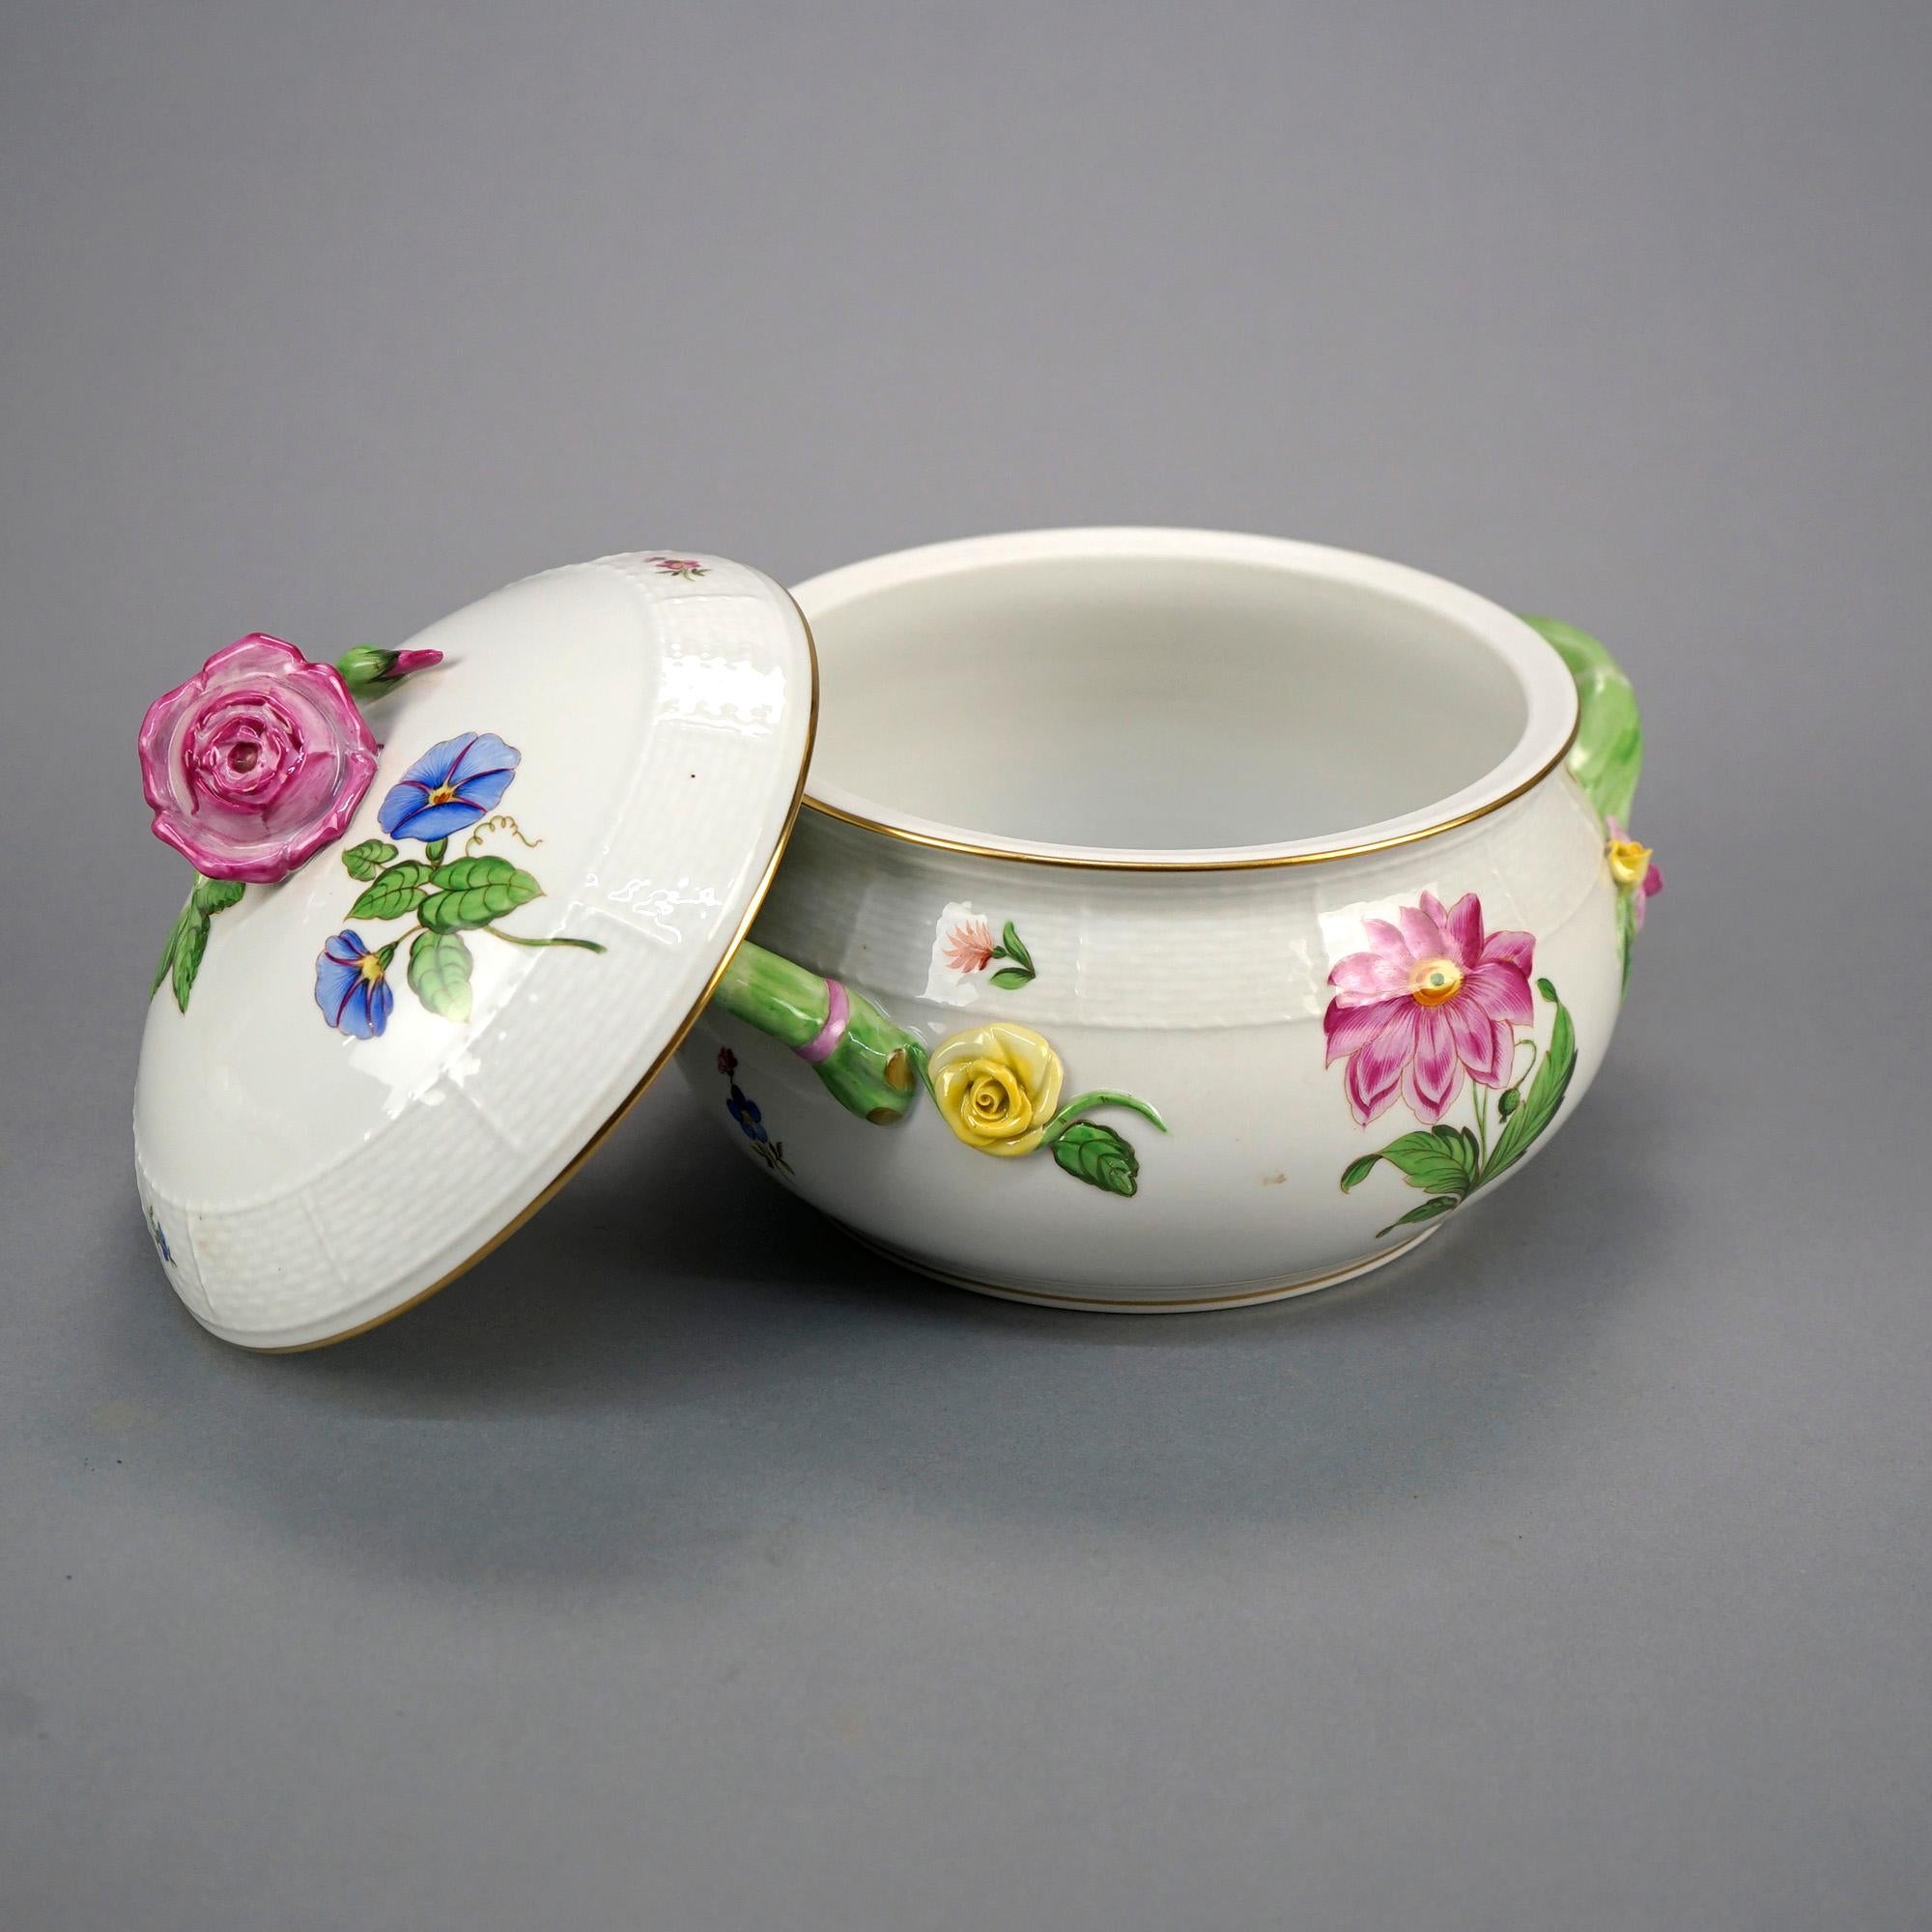 Herend Porcelain Floral Decorated Covered Tureen with Applied Flowers, 20th C 3